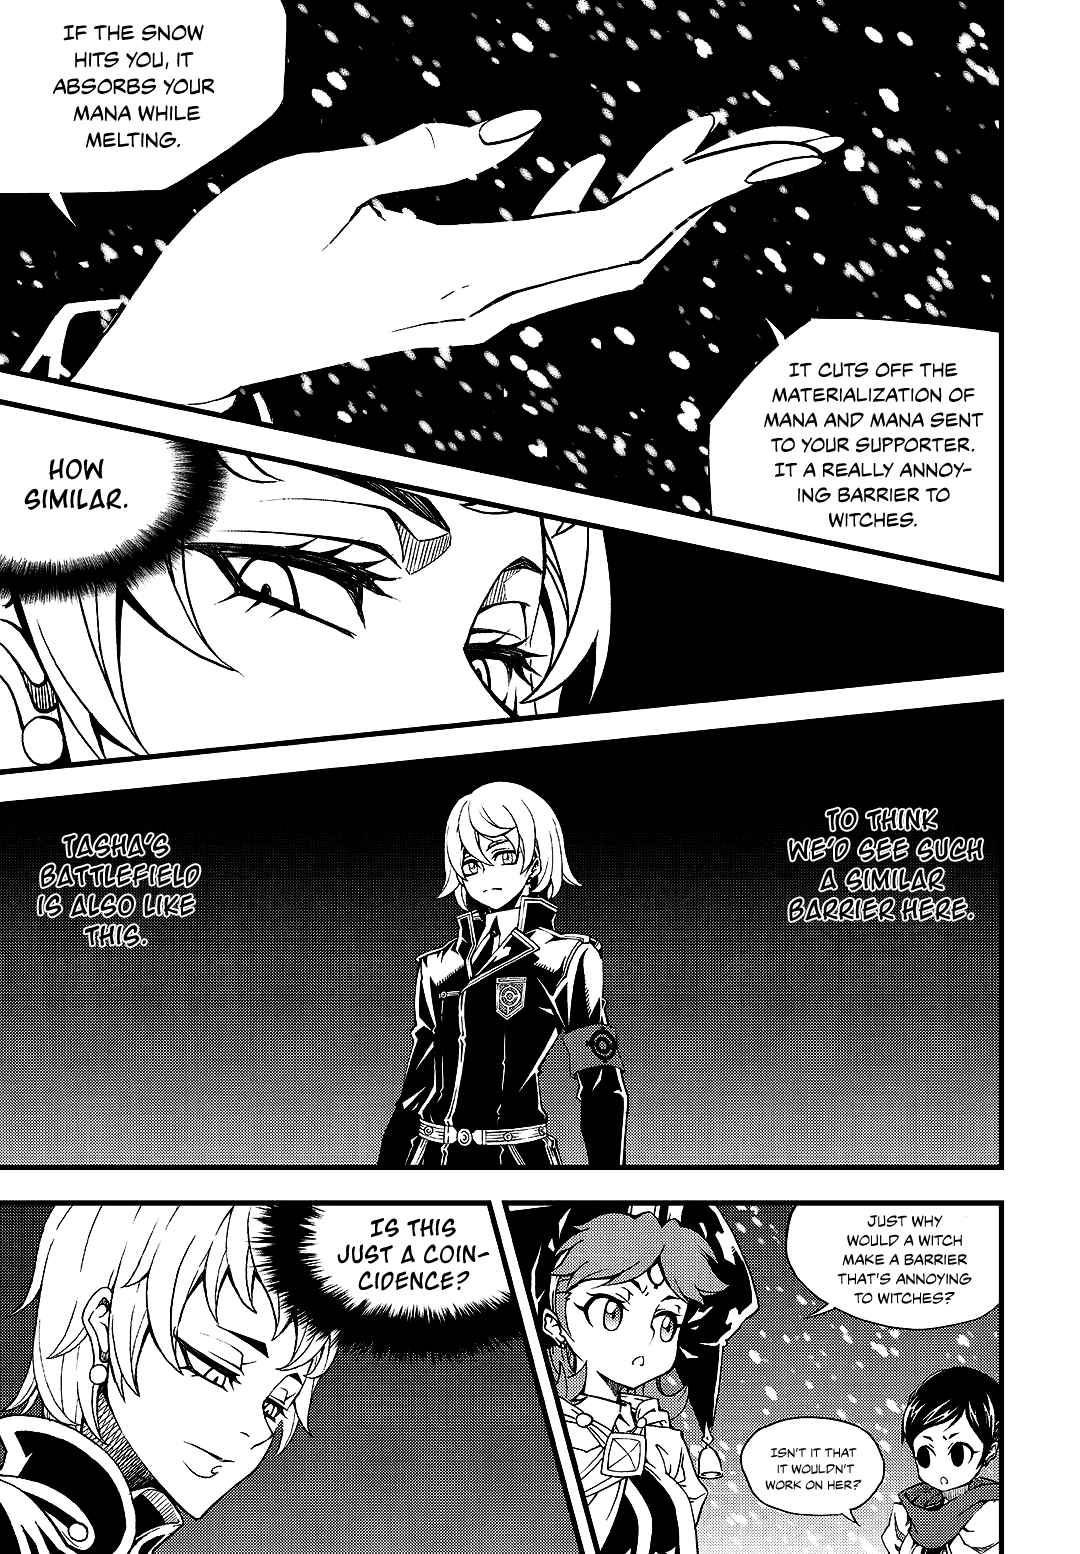 Witch Hunter Ch. 208 Barrier